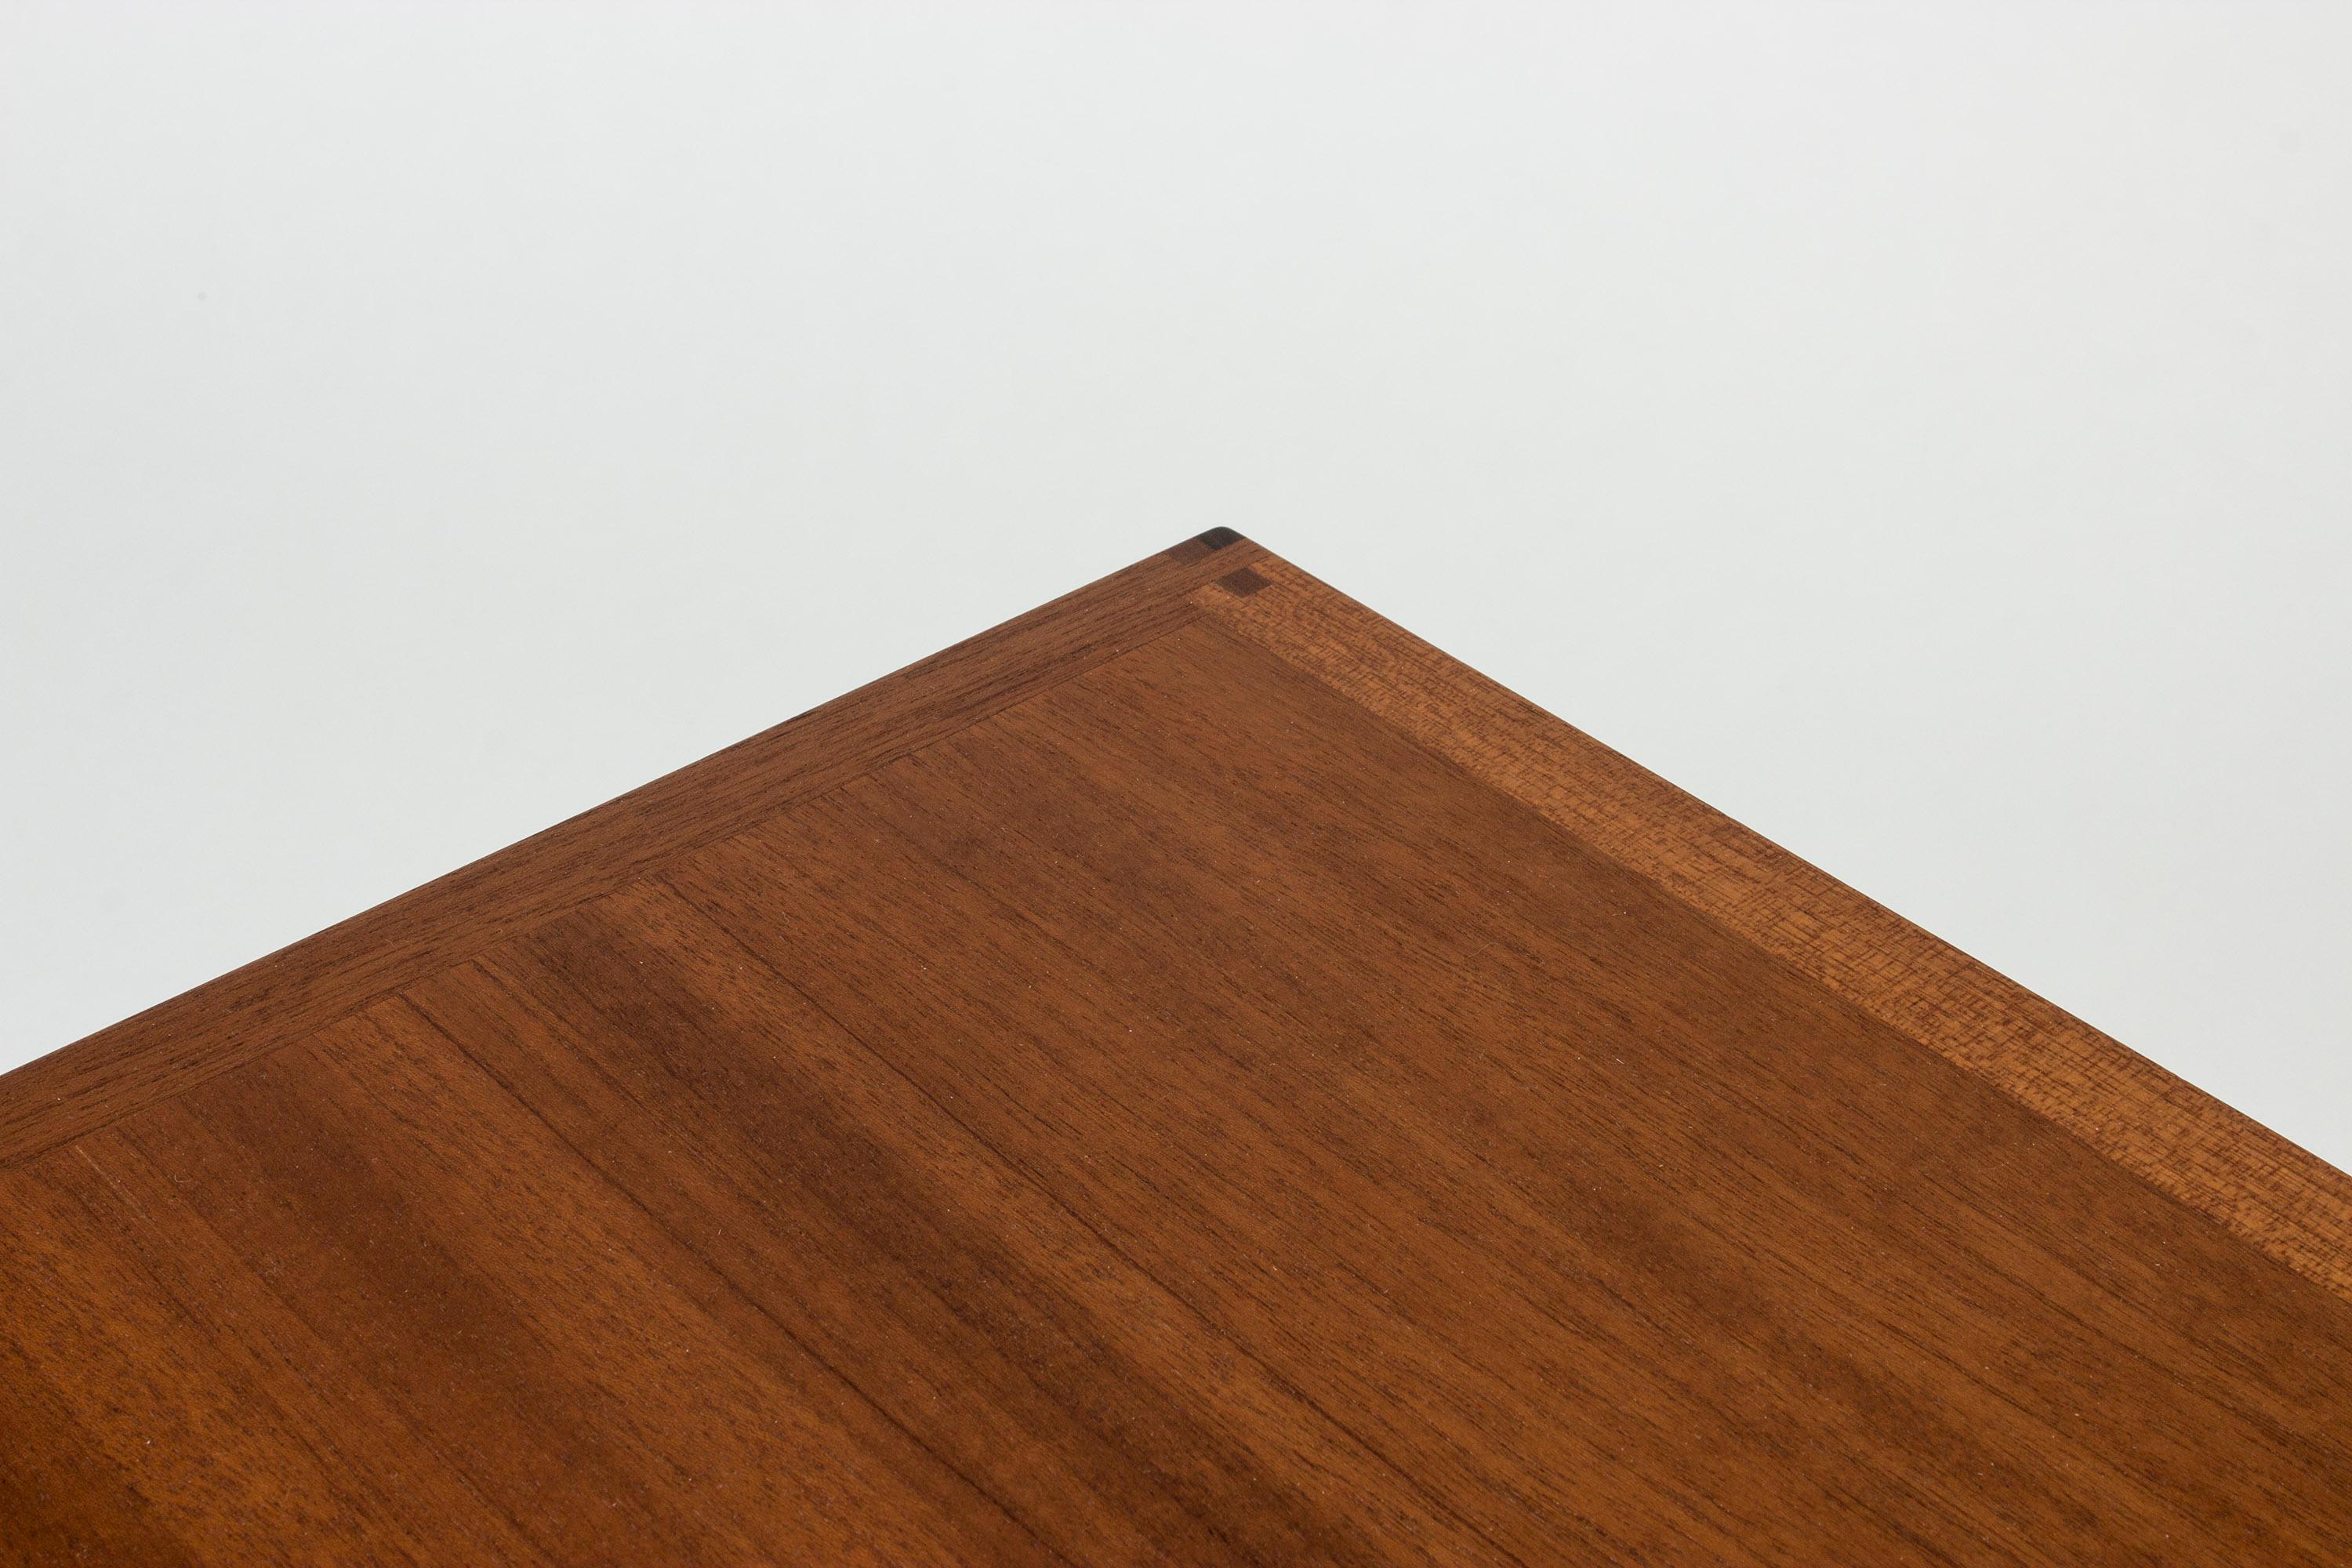 Late 20th Century Teak Side Table from HI-Gruppen, Executed by Lars Larsson, Sweden, 1960s